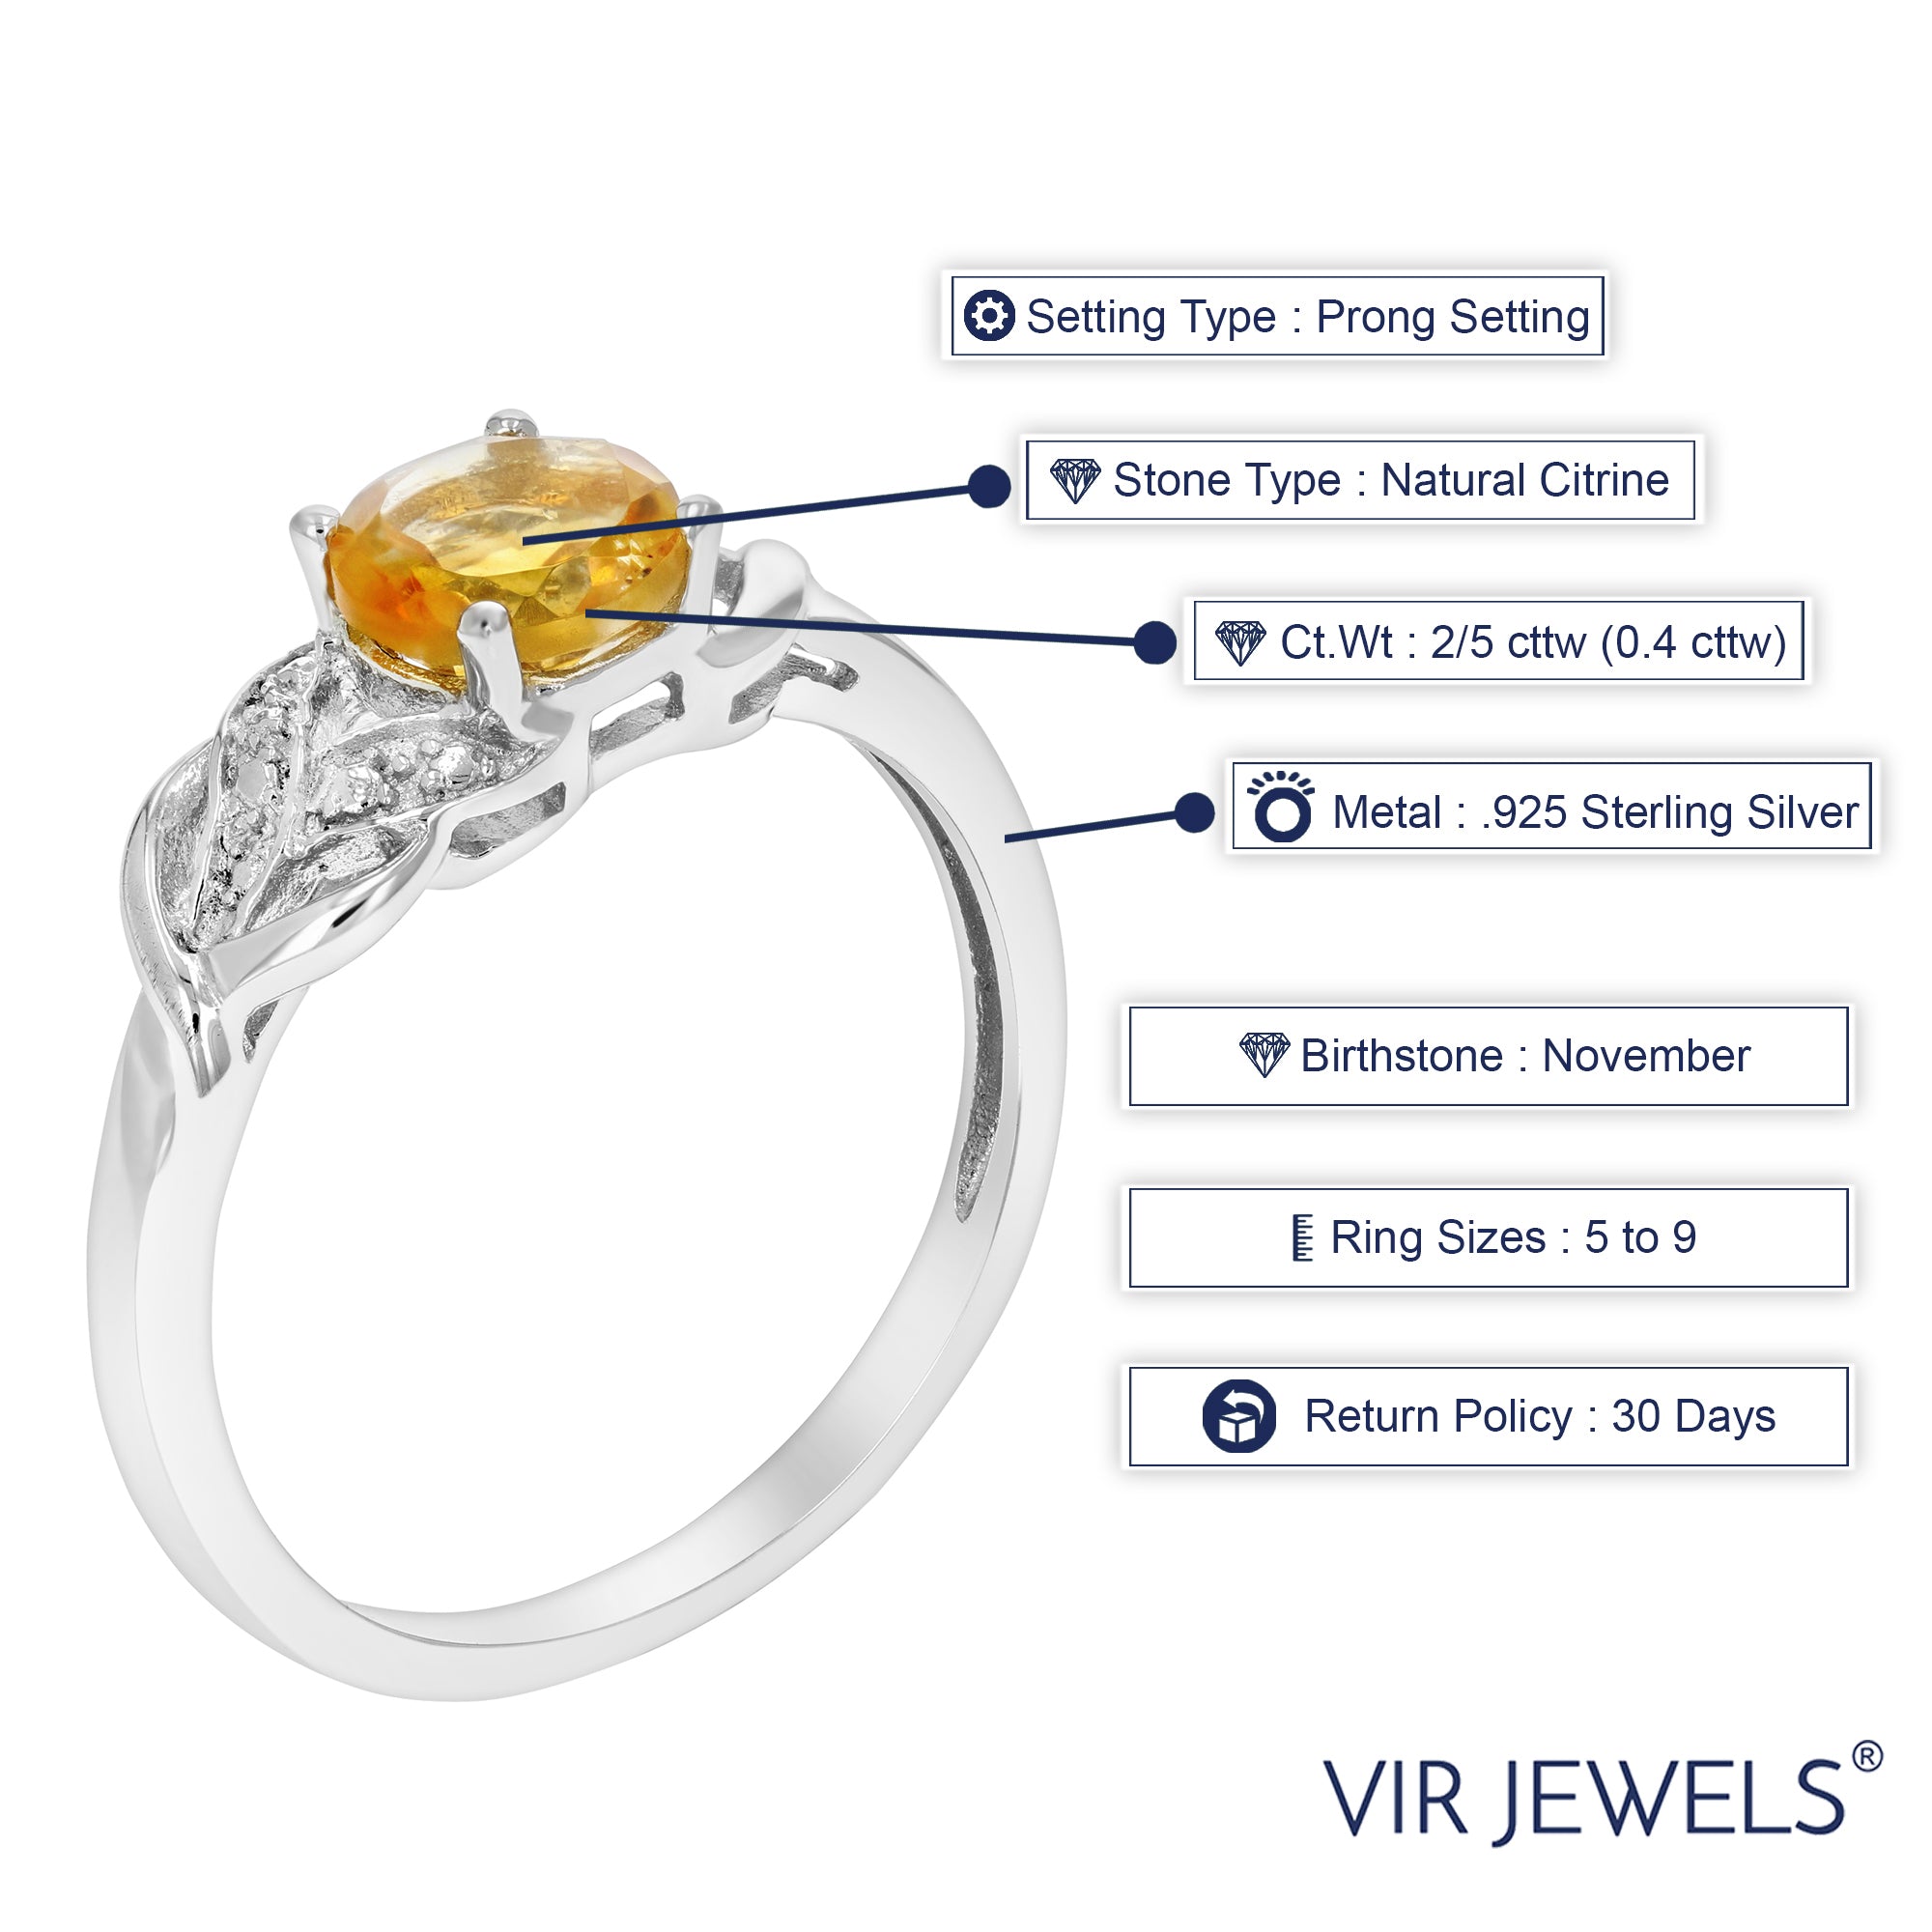 2/5 cttw Citrine Ring .925 Sterling Silver with Rhodium Plating Round Shape 5 MM